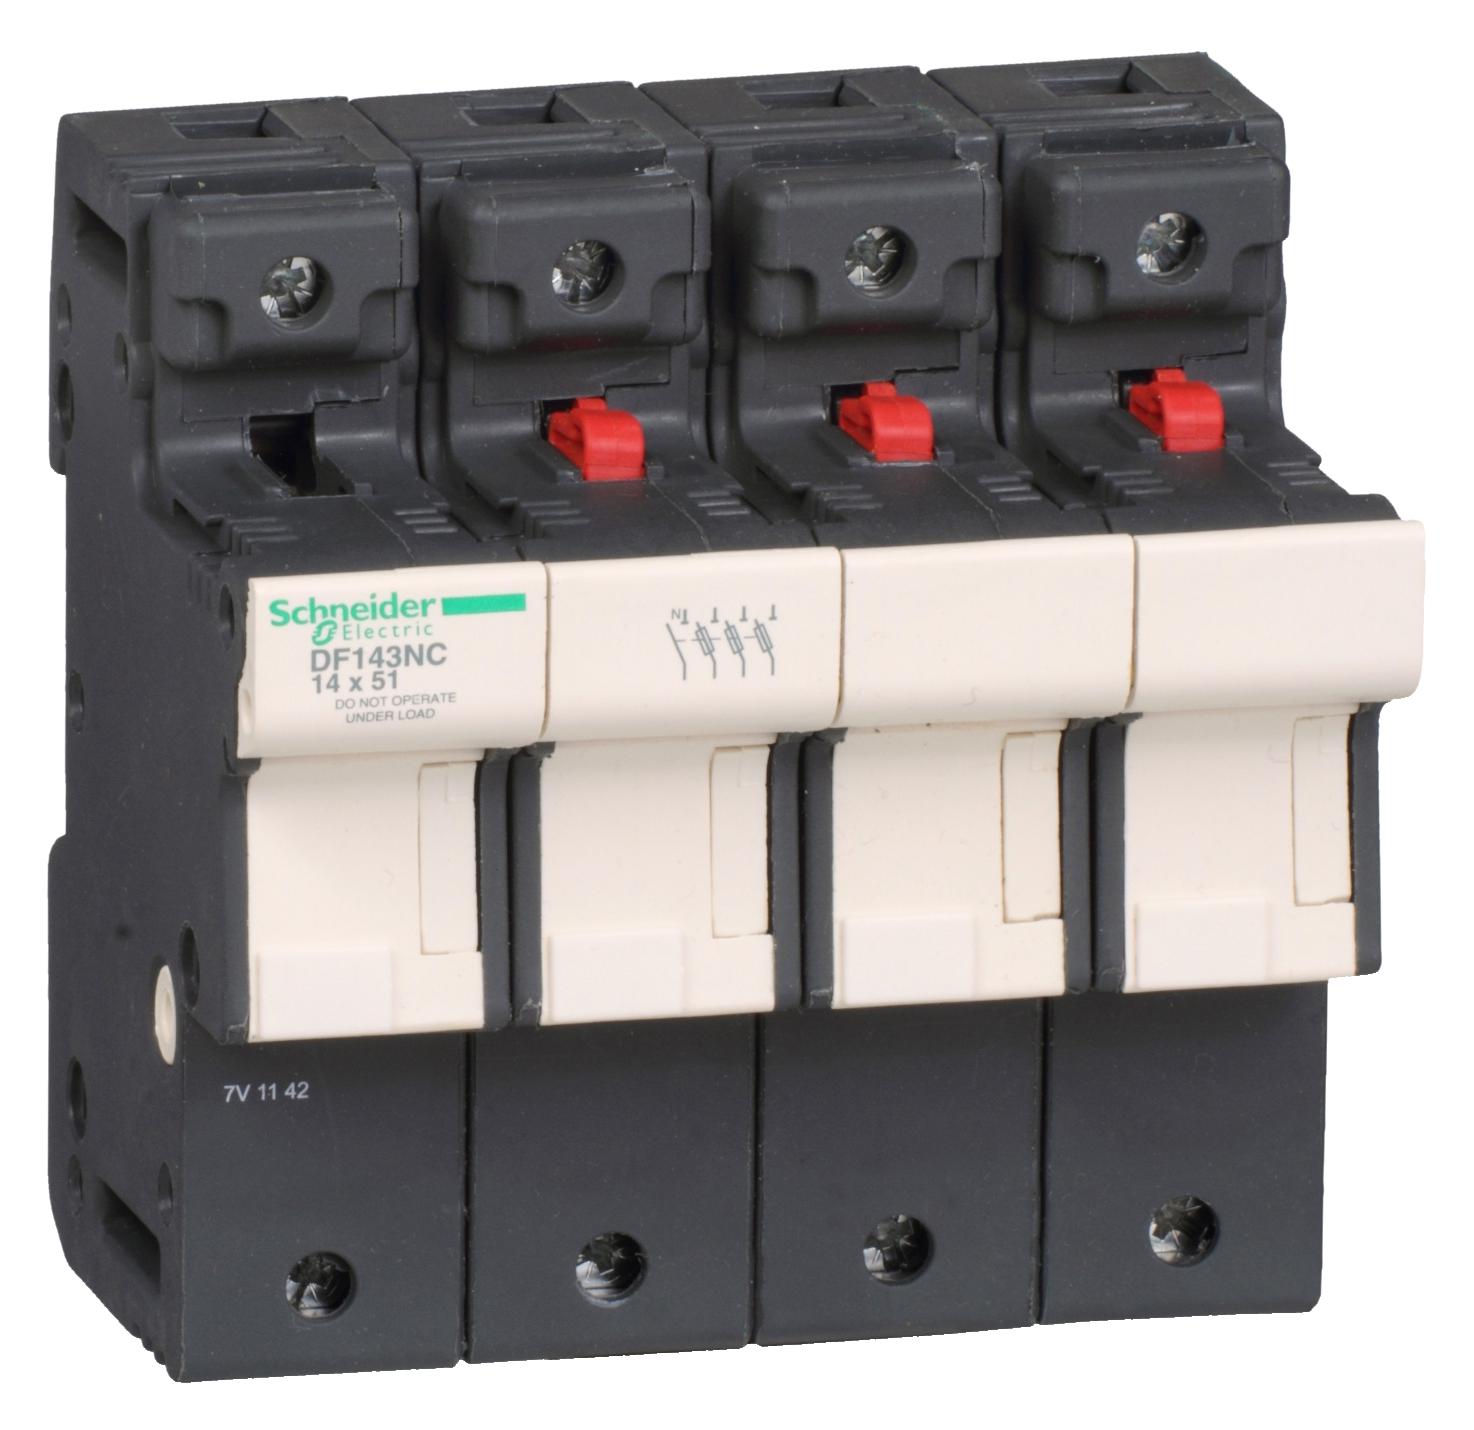 DF143NC FUSE HOLDER 3P N 50A FOR FUSE 14 SCHNEIDER ELECTRIC